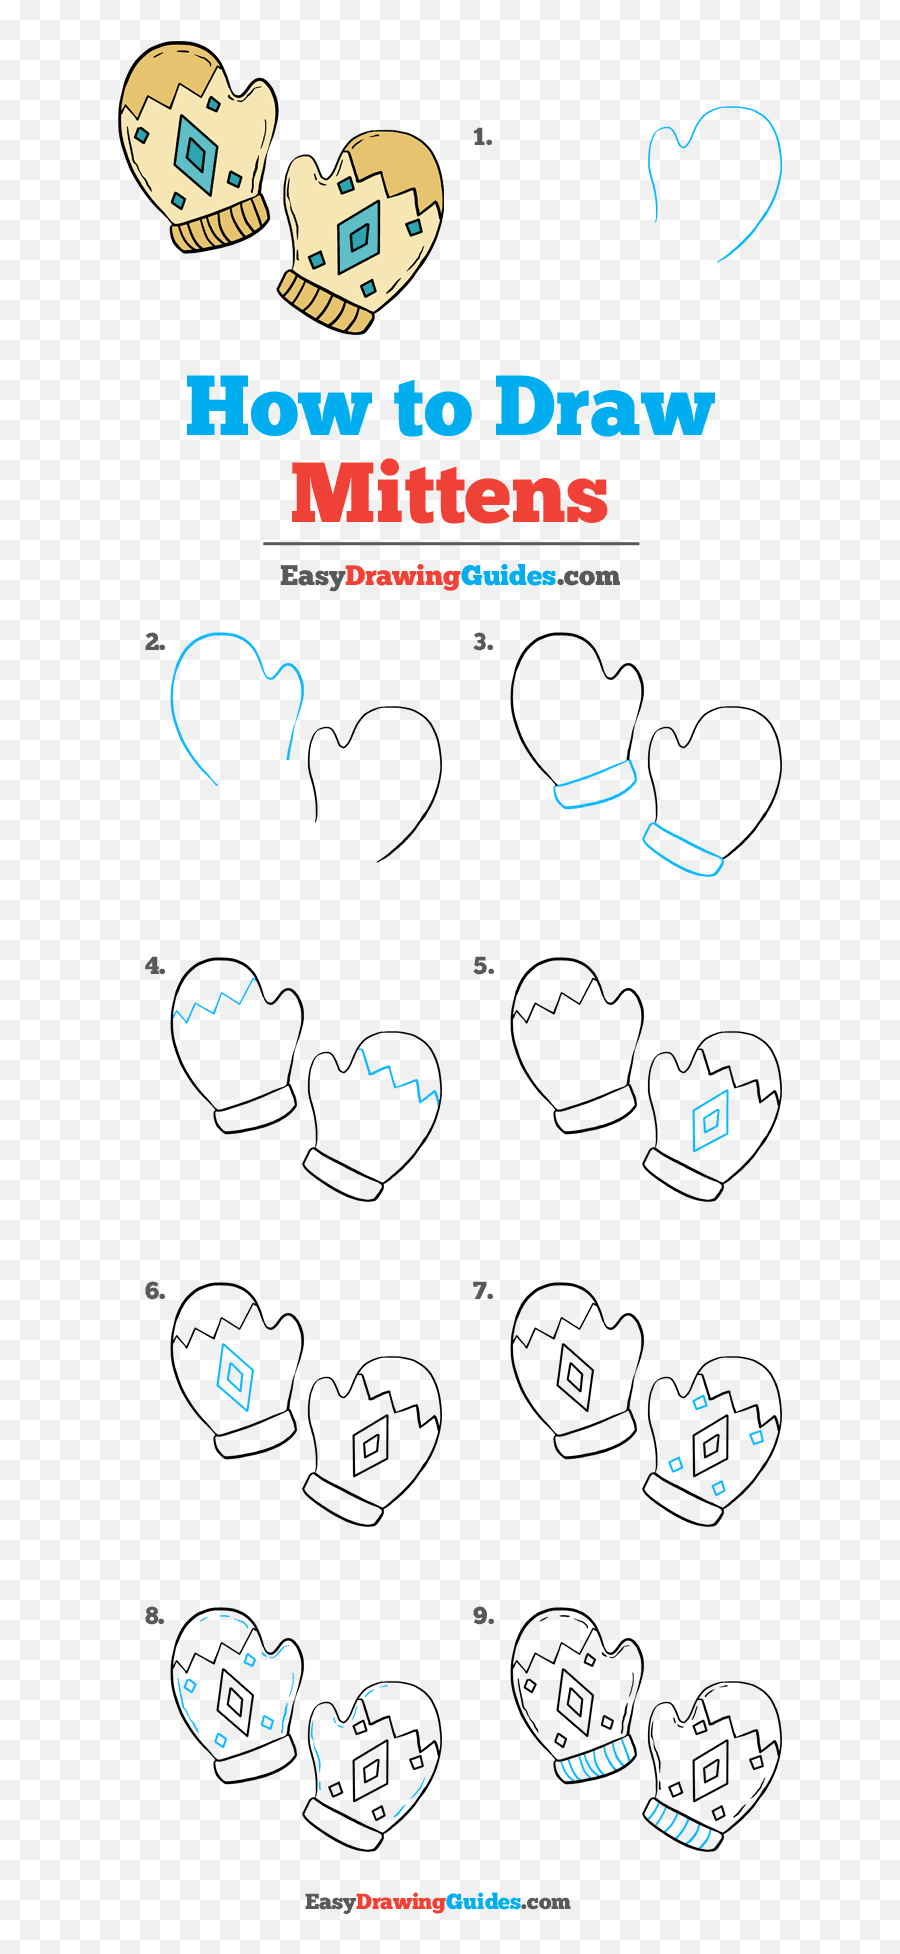 How To Draw Mittens - Really Easy Drawing Tutorial Angler Fish Drawing Step By Step Emoji,Mitten Emoji